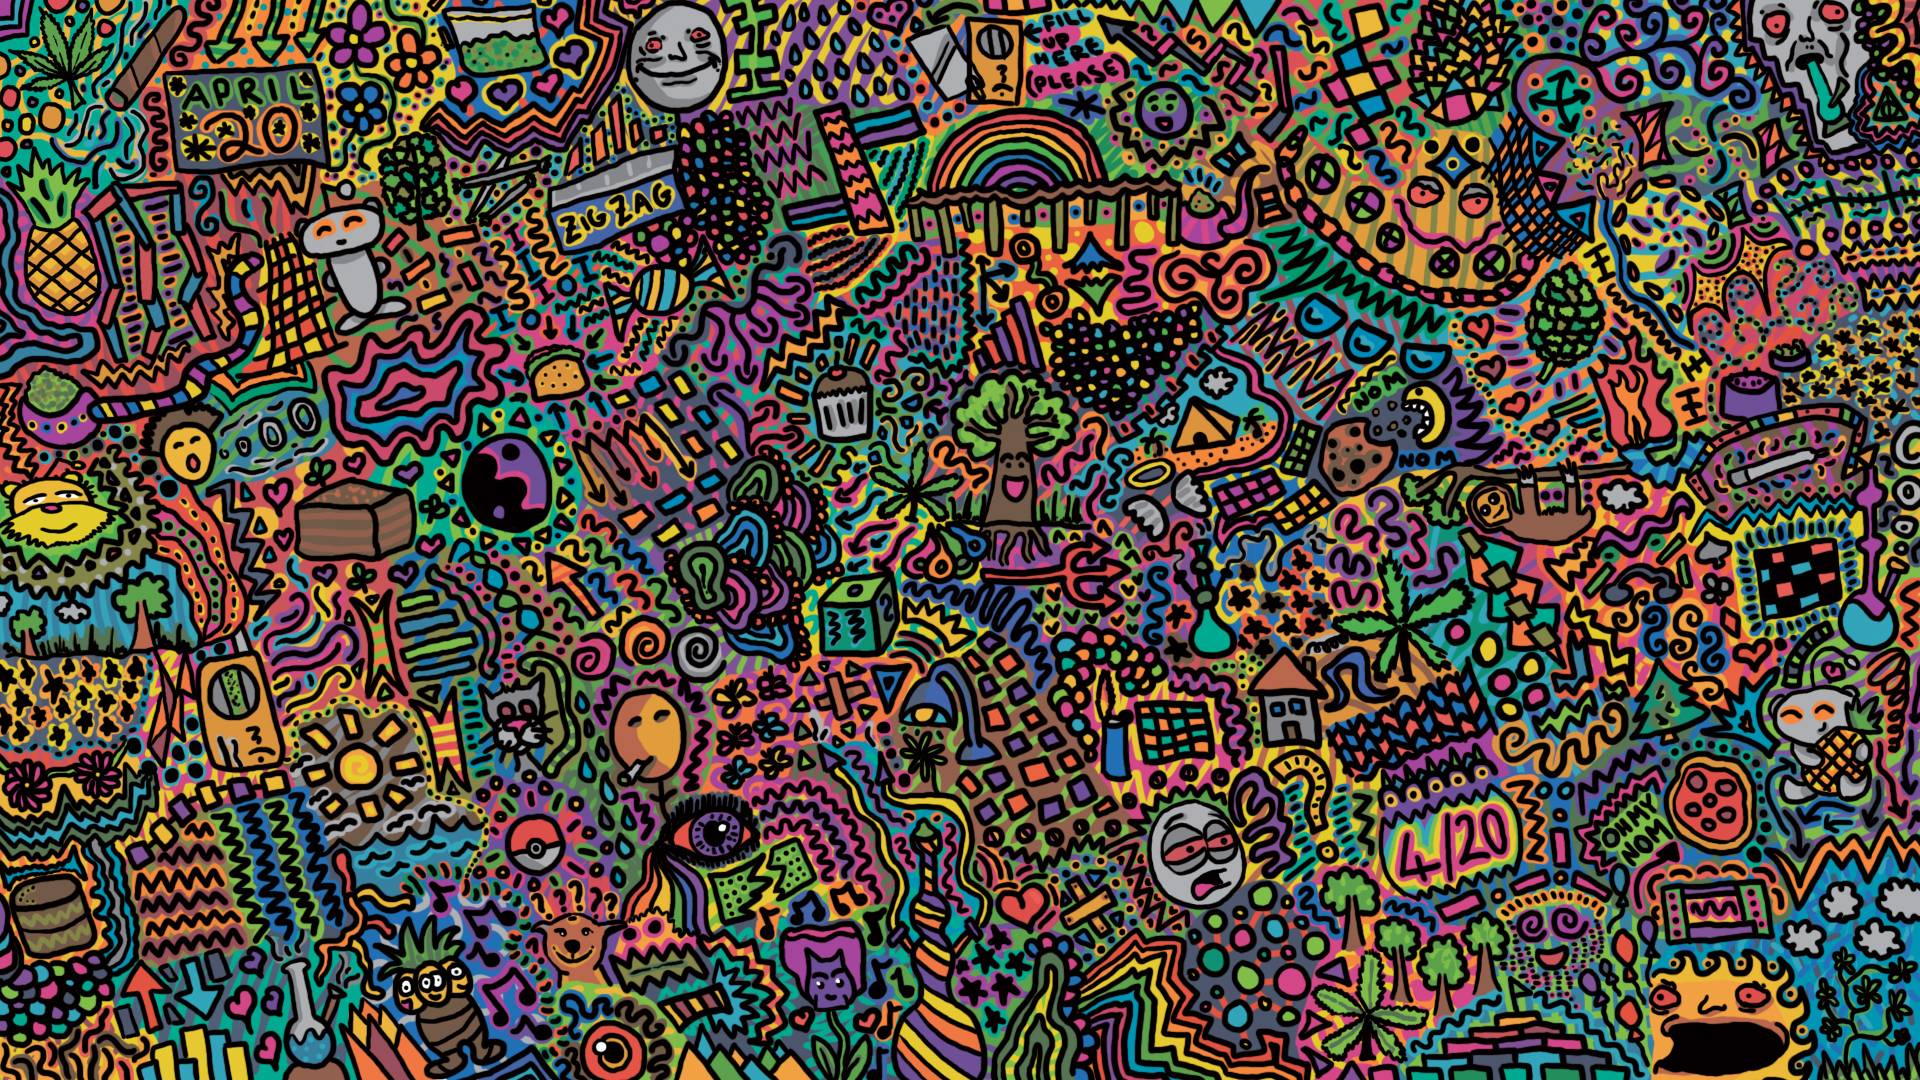 Moving Psychedelic Wallpaper